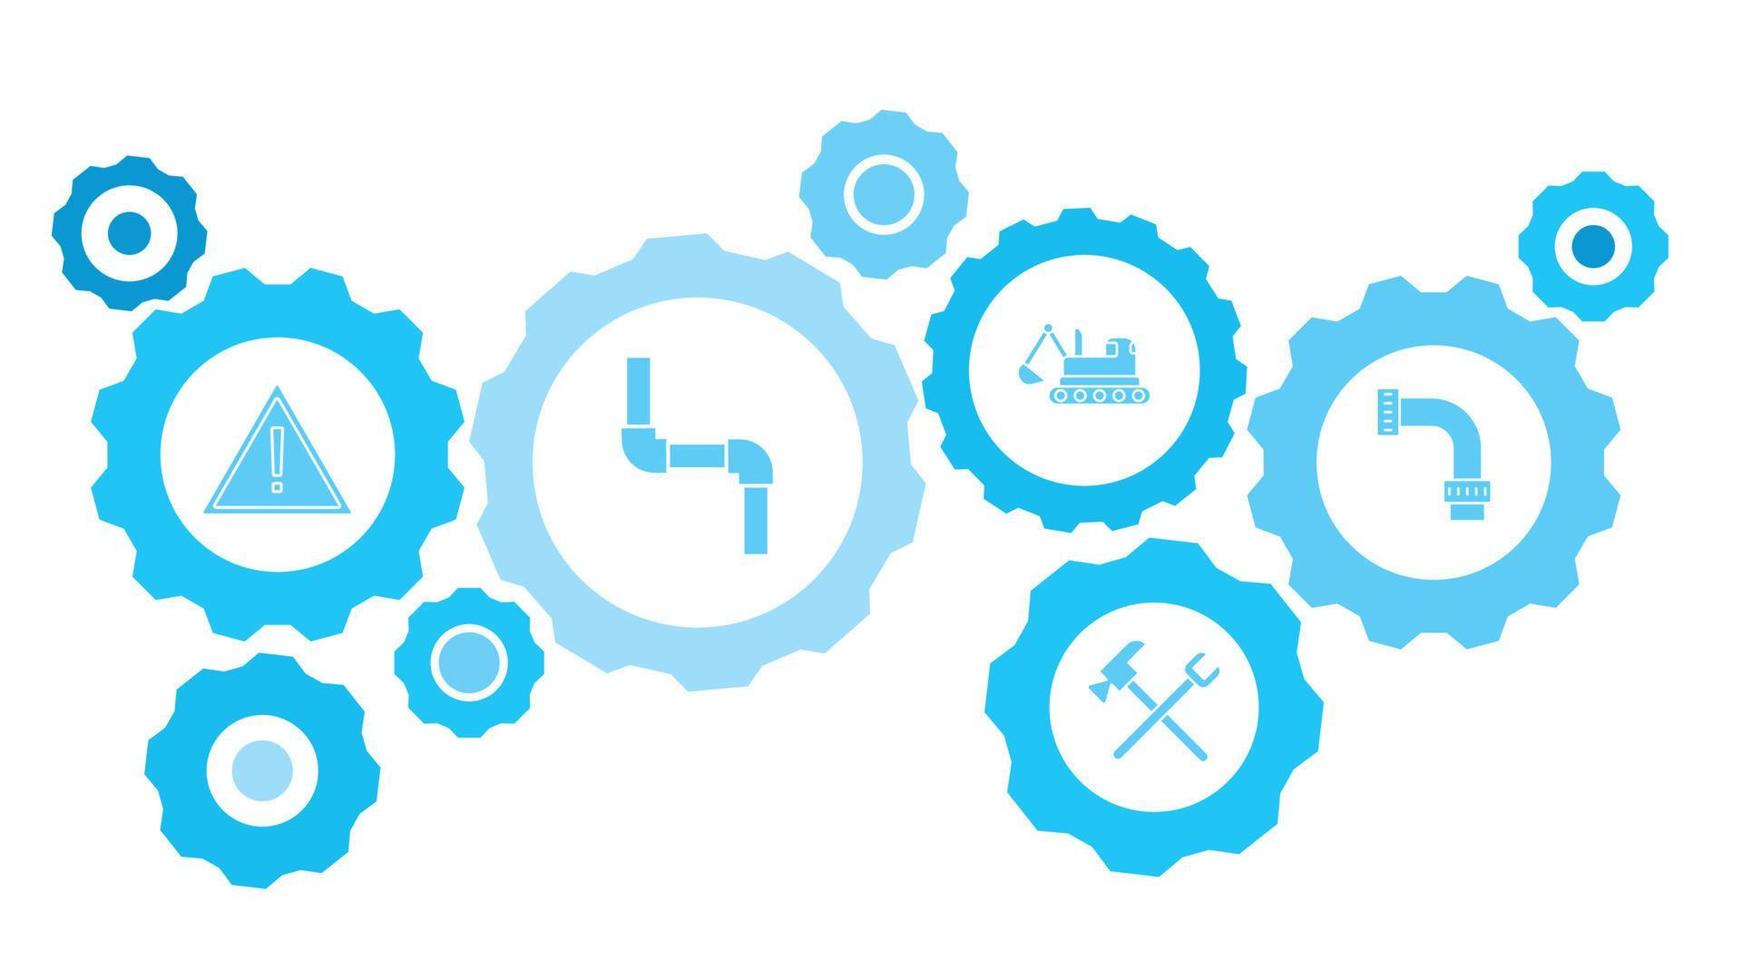 Connected gears and vector icons for logistic, service, shipping, distribution, transport, market, communicate concepts. building, construction, industry, pipe gear blue icon set on white background